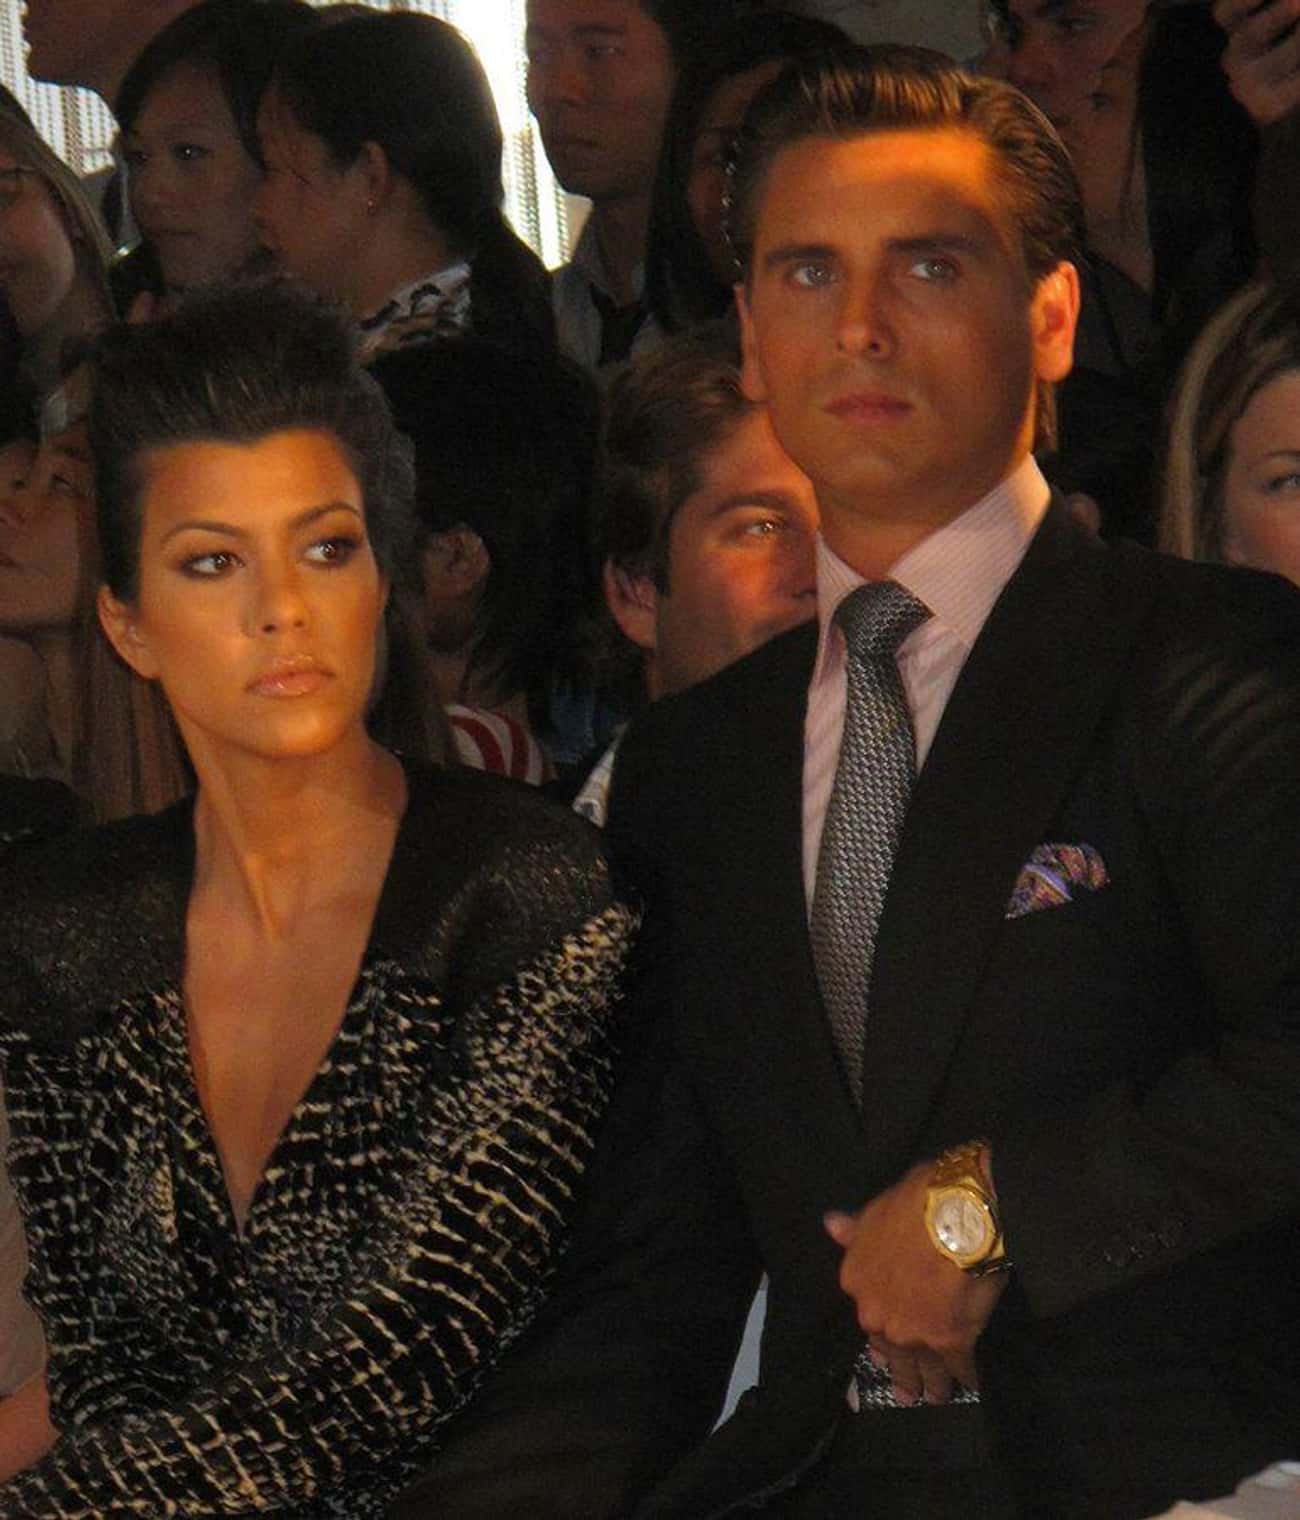 Scott Disick Lost Both Of His Parents While He Was On 'KUWTK'